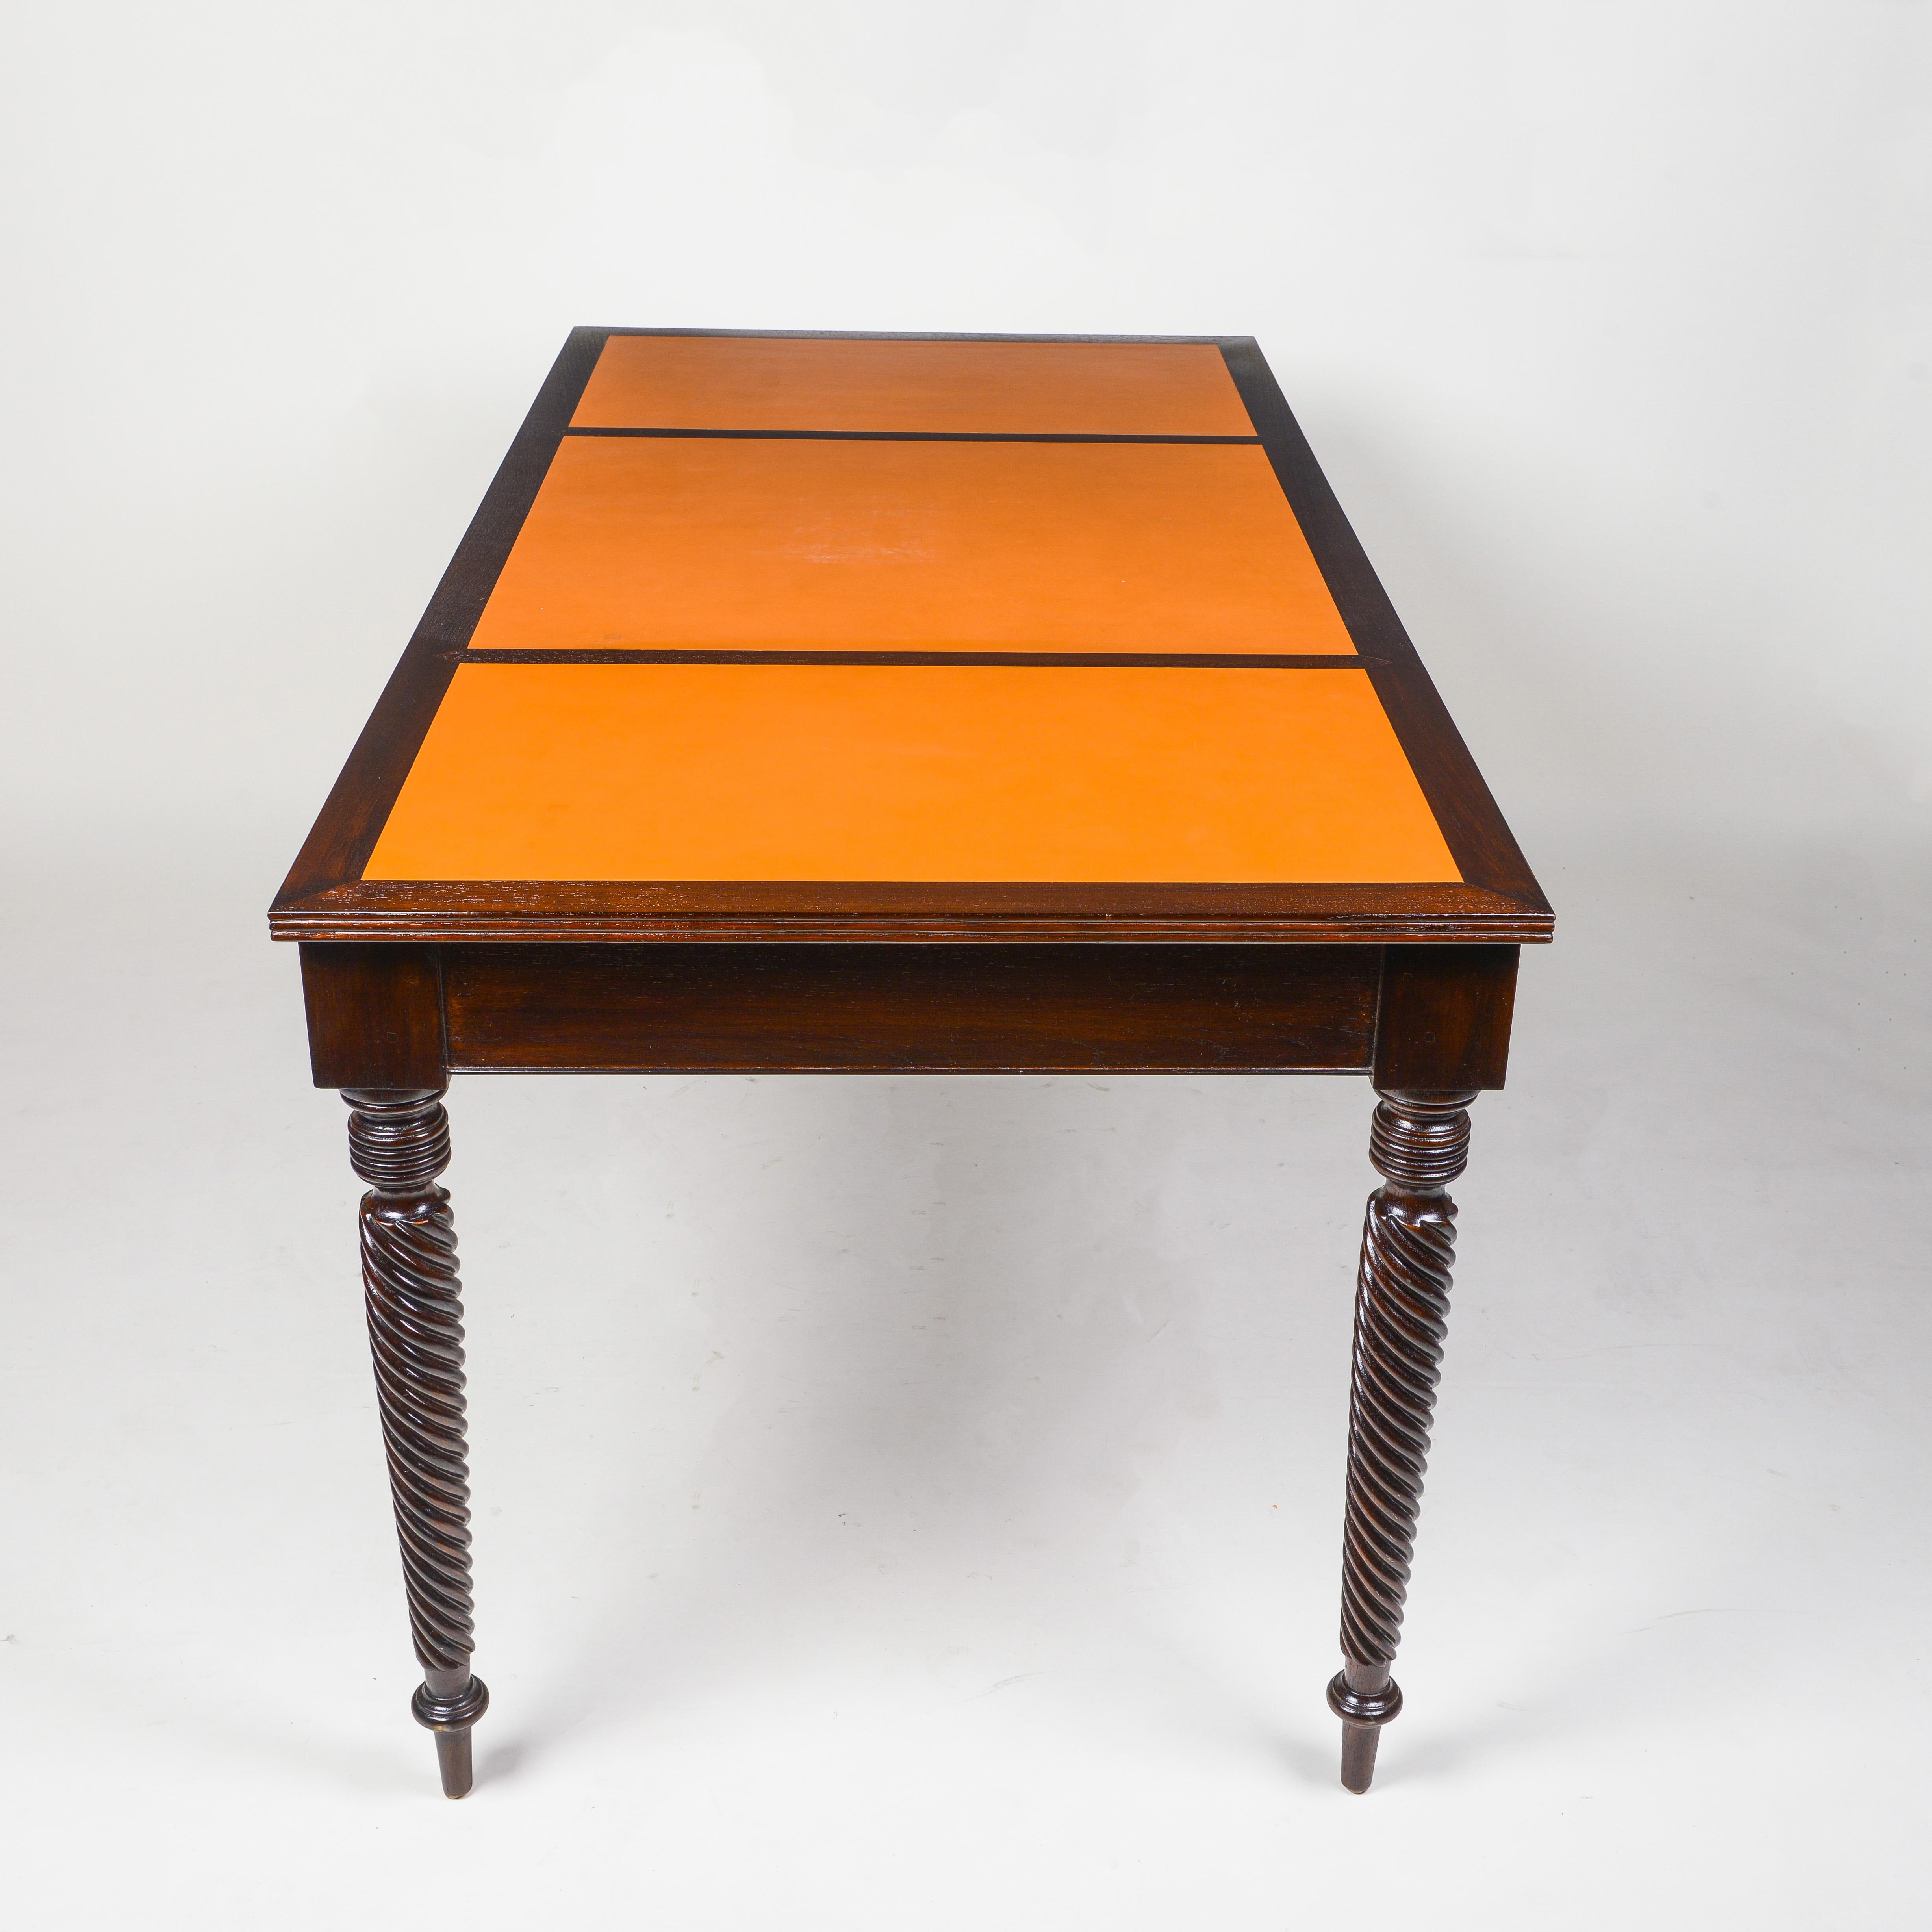 20th Century Neoclassical Style Mahogany-Stained Wood and Leather-Lined Writing Table For Sale